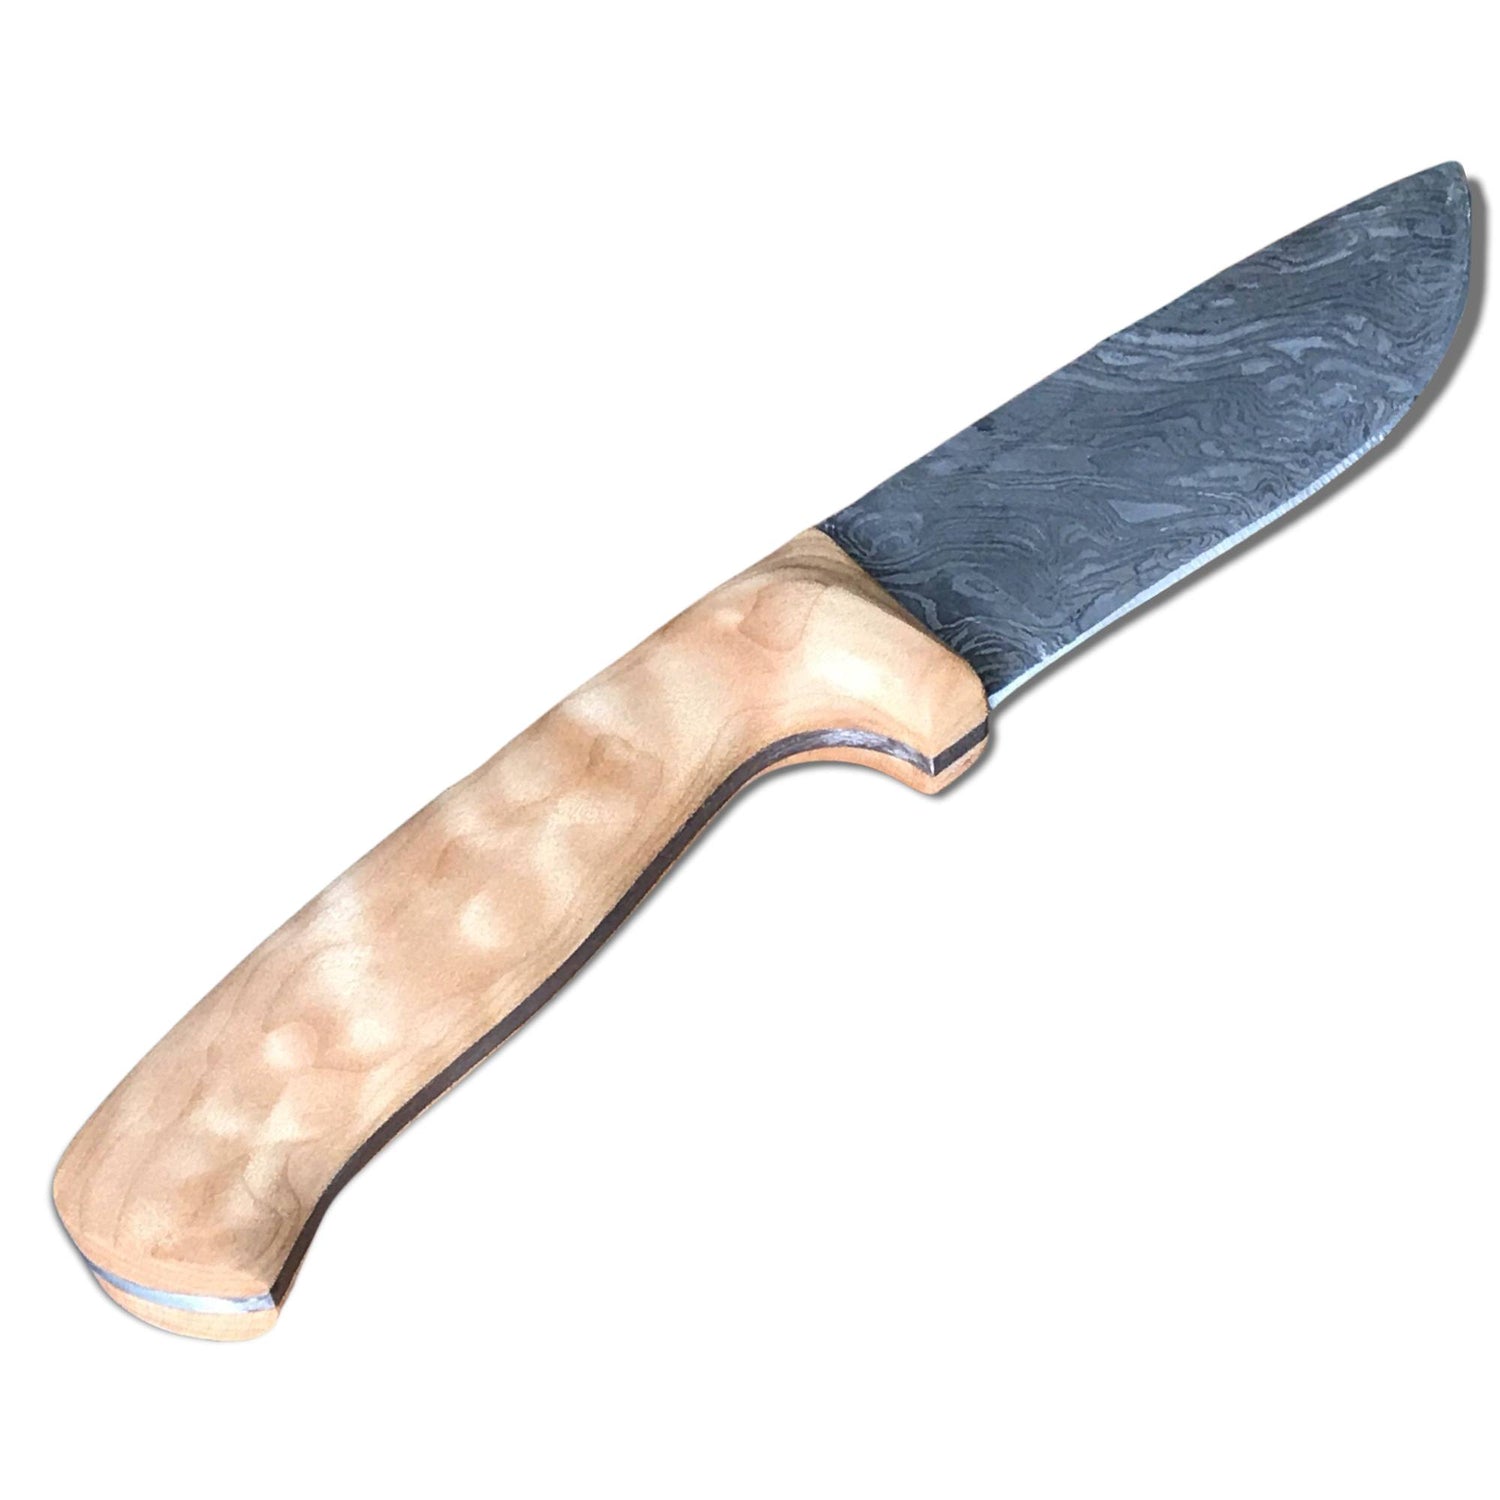 Craft Knife Blades - Ventana Quilted Maple Knife